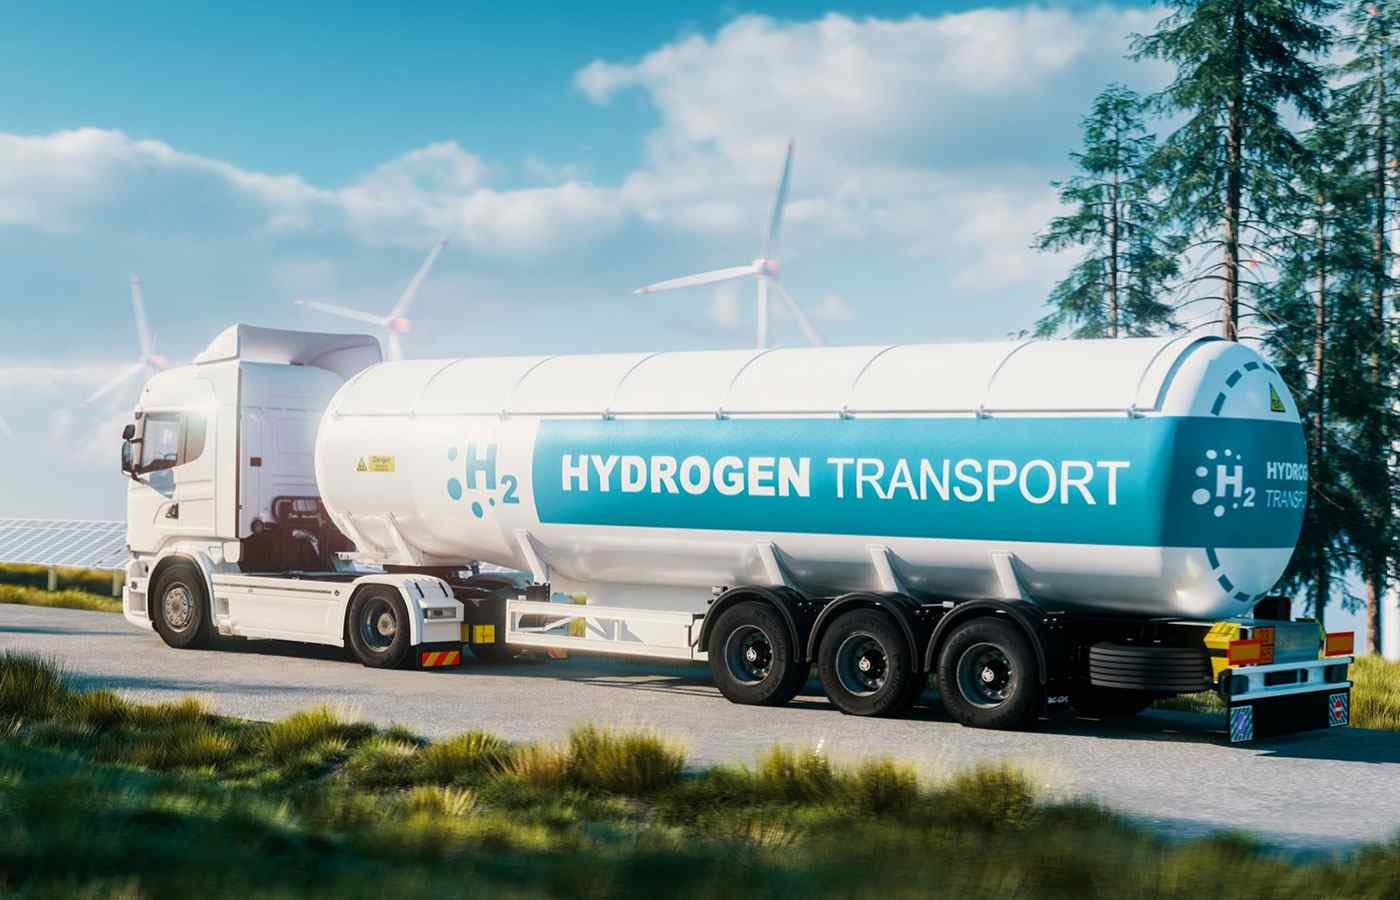 3 potentially explosive hydrogen shares to watch in 2022